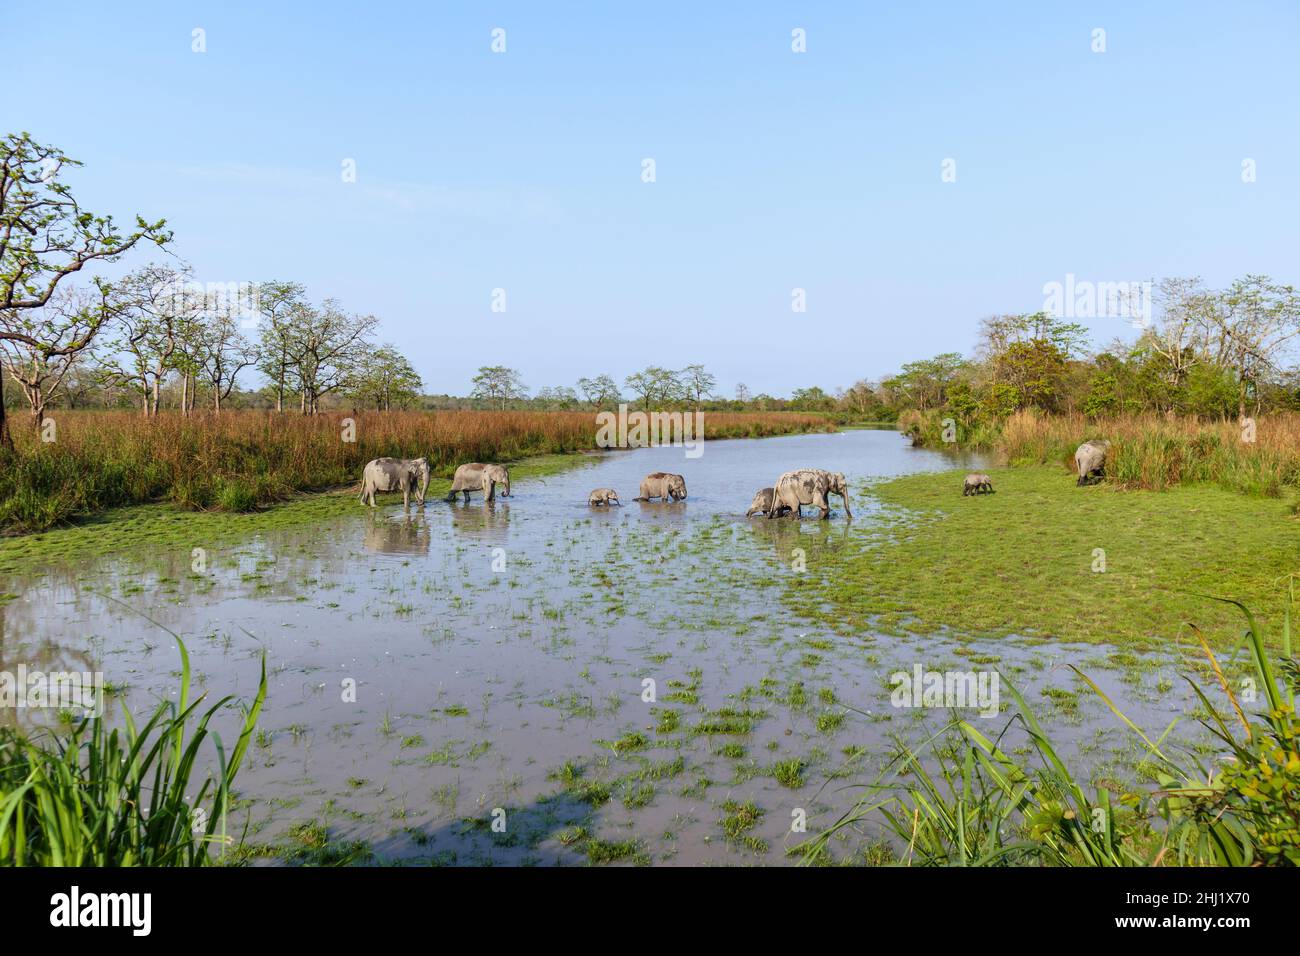 A family group of Indian elephants (Elephas maximus indicus) crosses a river in Kaziranga National Park, Assam, north-eastern India Stock Photo